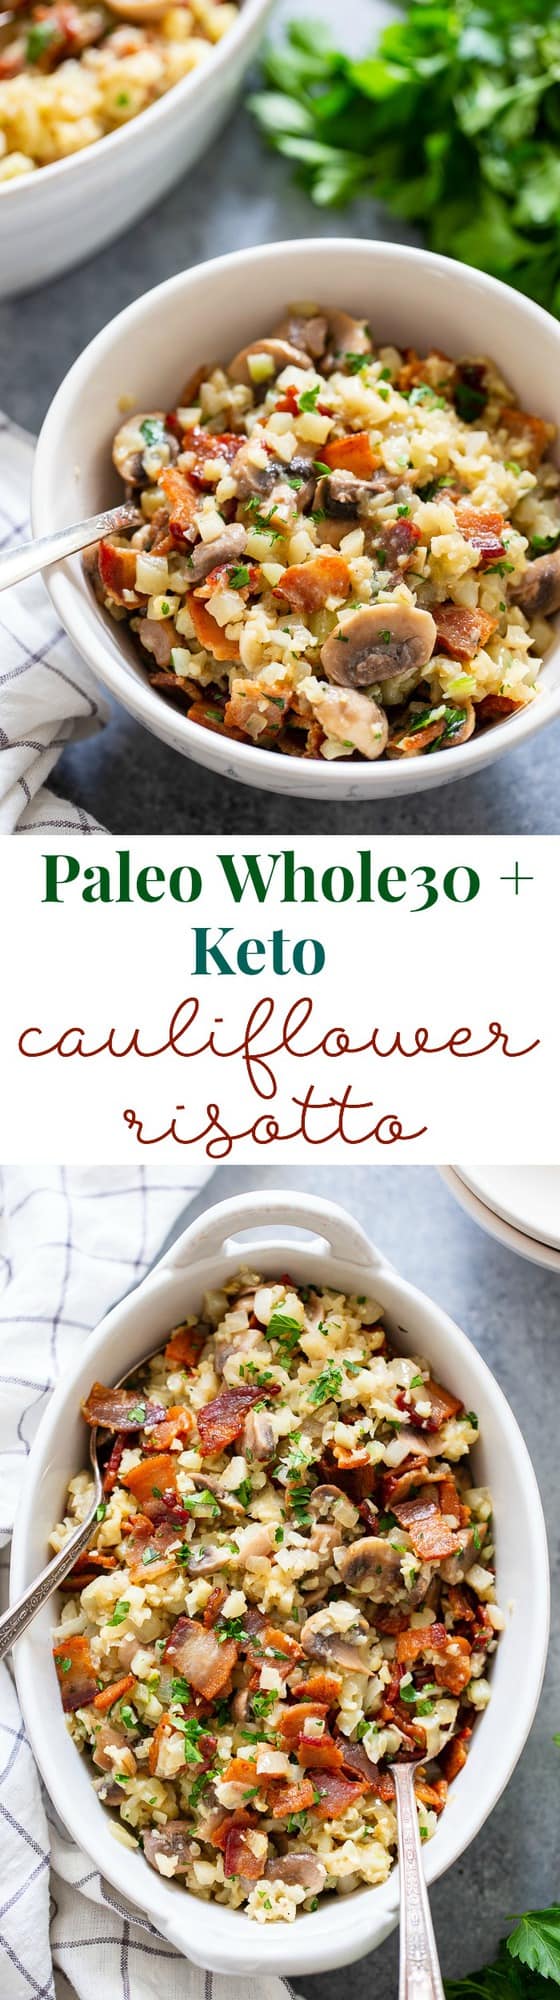 This cauliflower risotto is super easy to make, packed with flavor and savory goodies!  Bacon, mushrooms, and a creamy sauce make this side dish one you’ll want again and again!  It’s dairy-free, paleo, keto friendly and Whole30 compliant. 